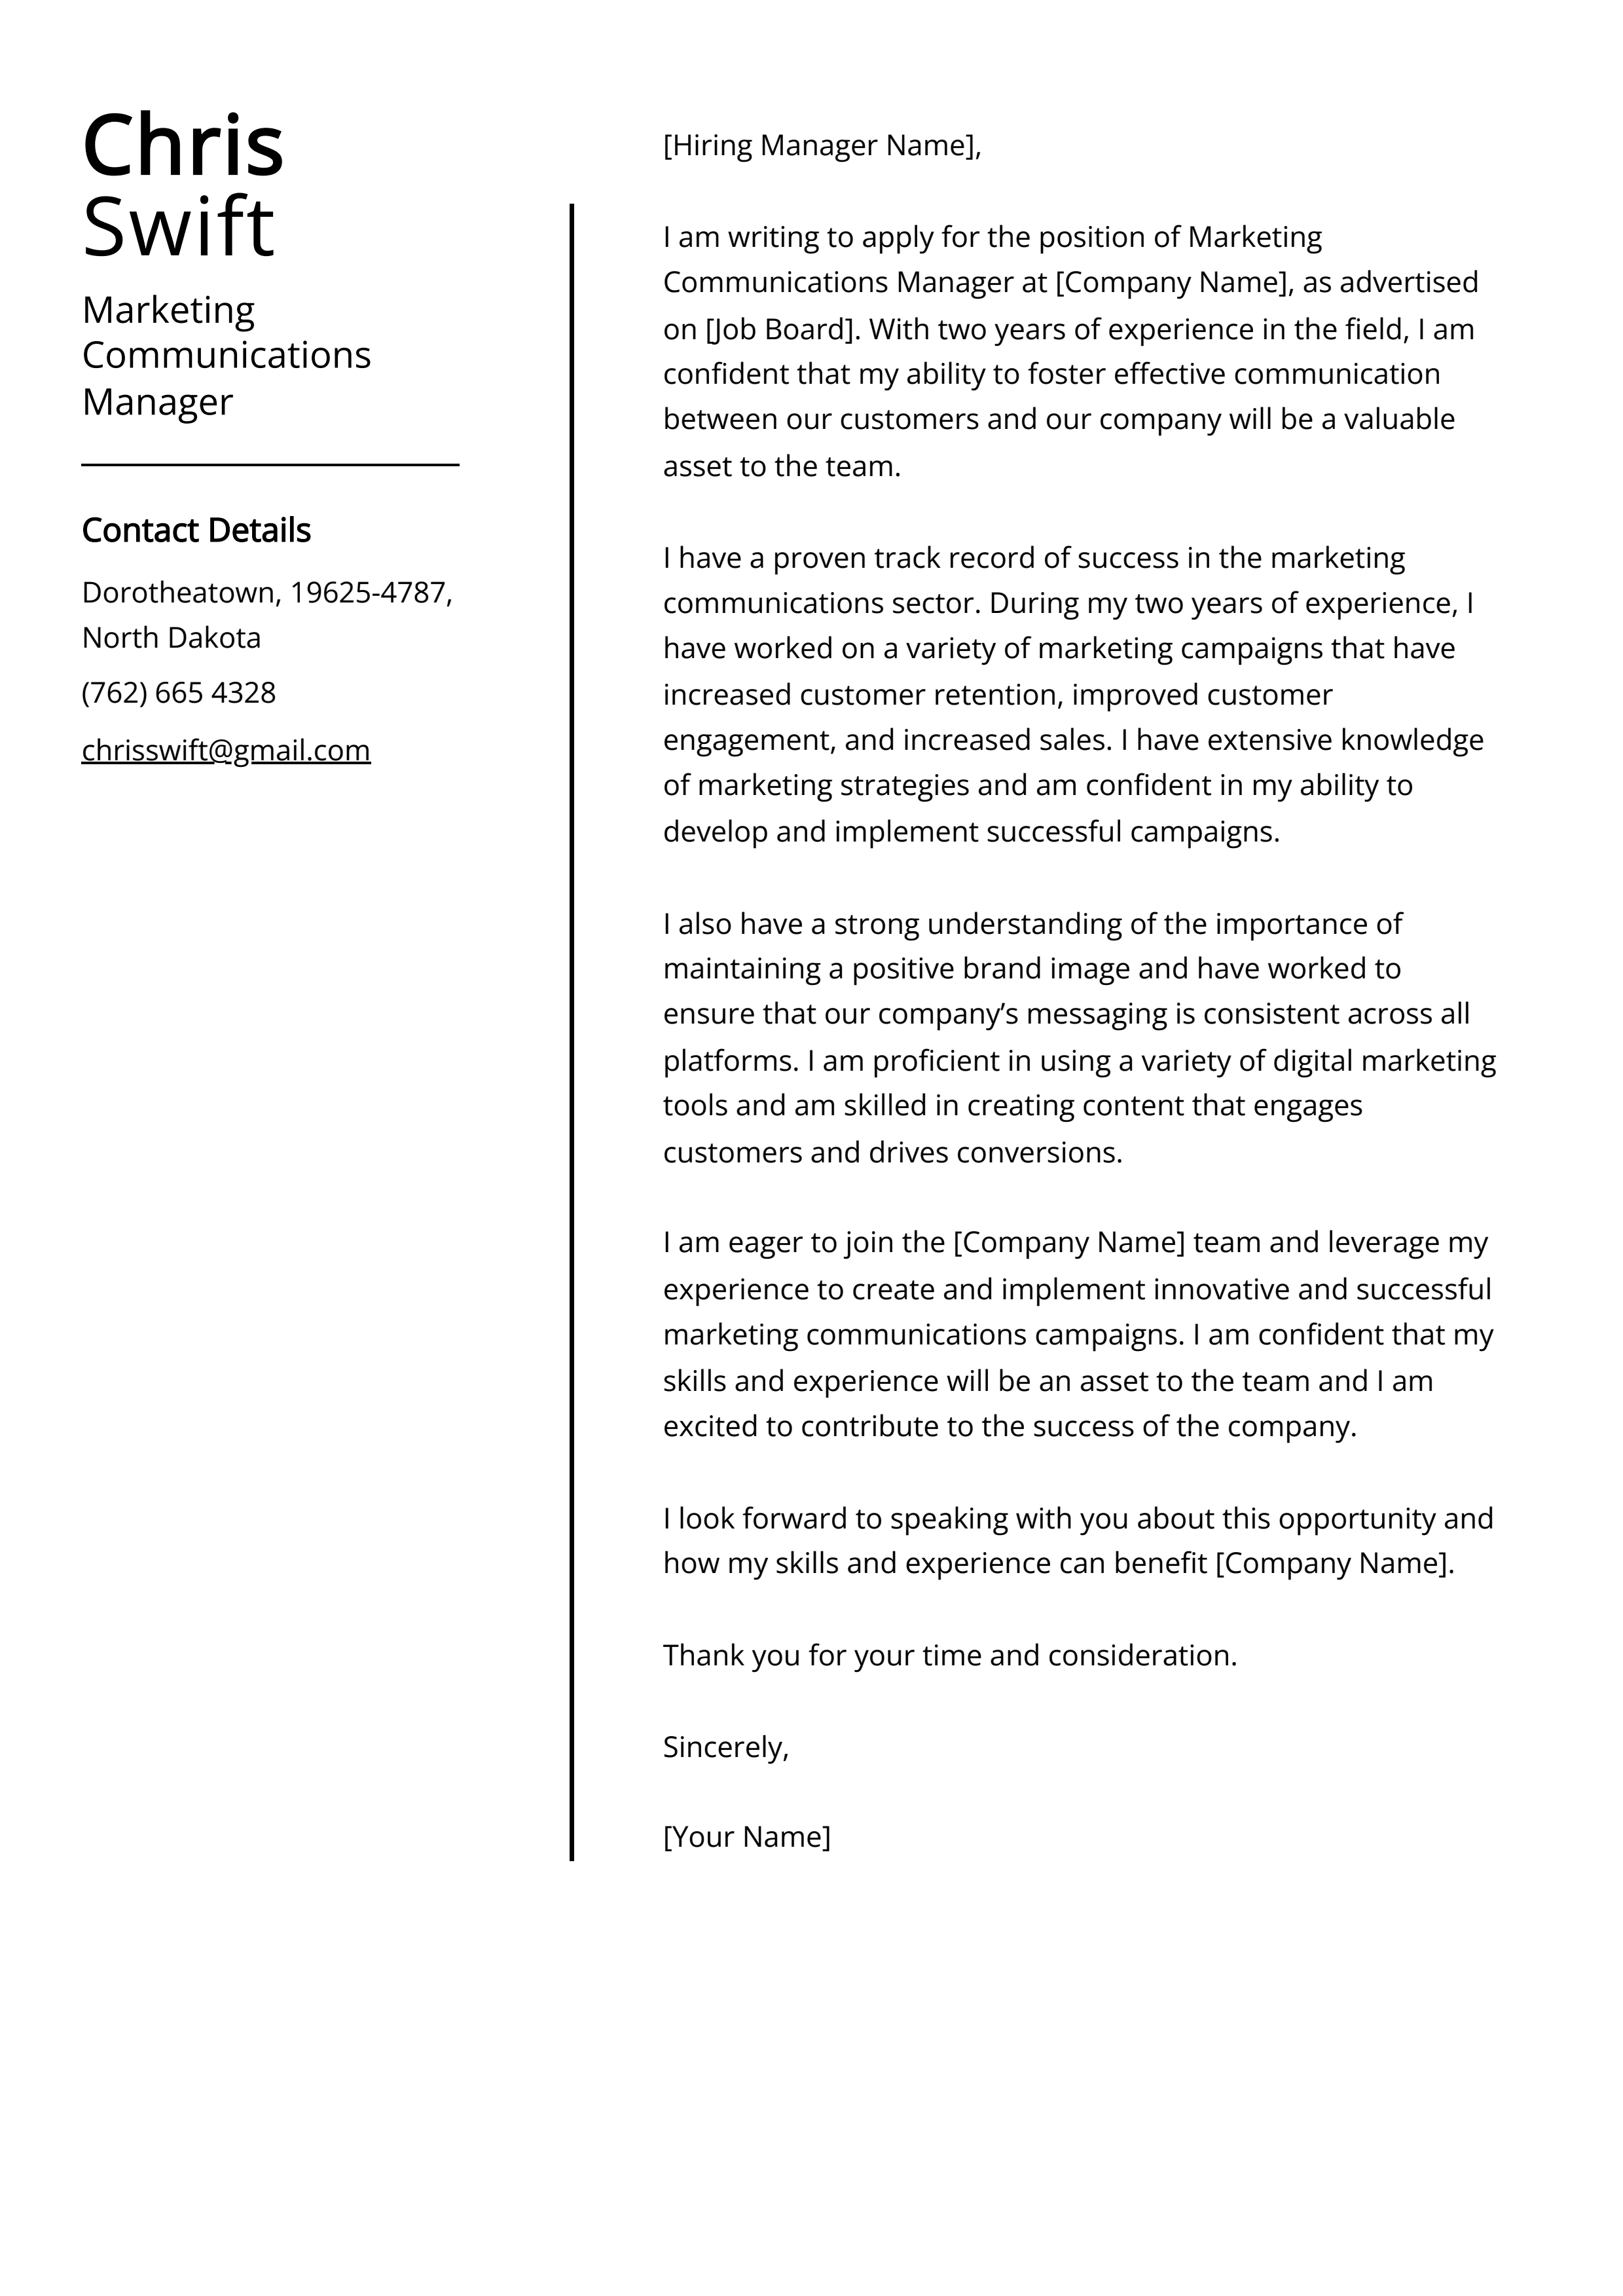 Marketing Communications Manager Cover Letter Example